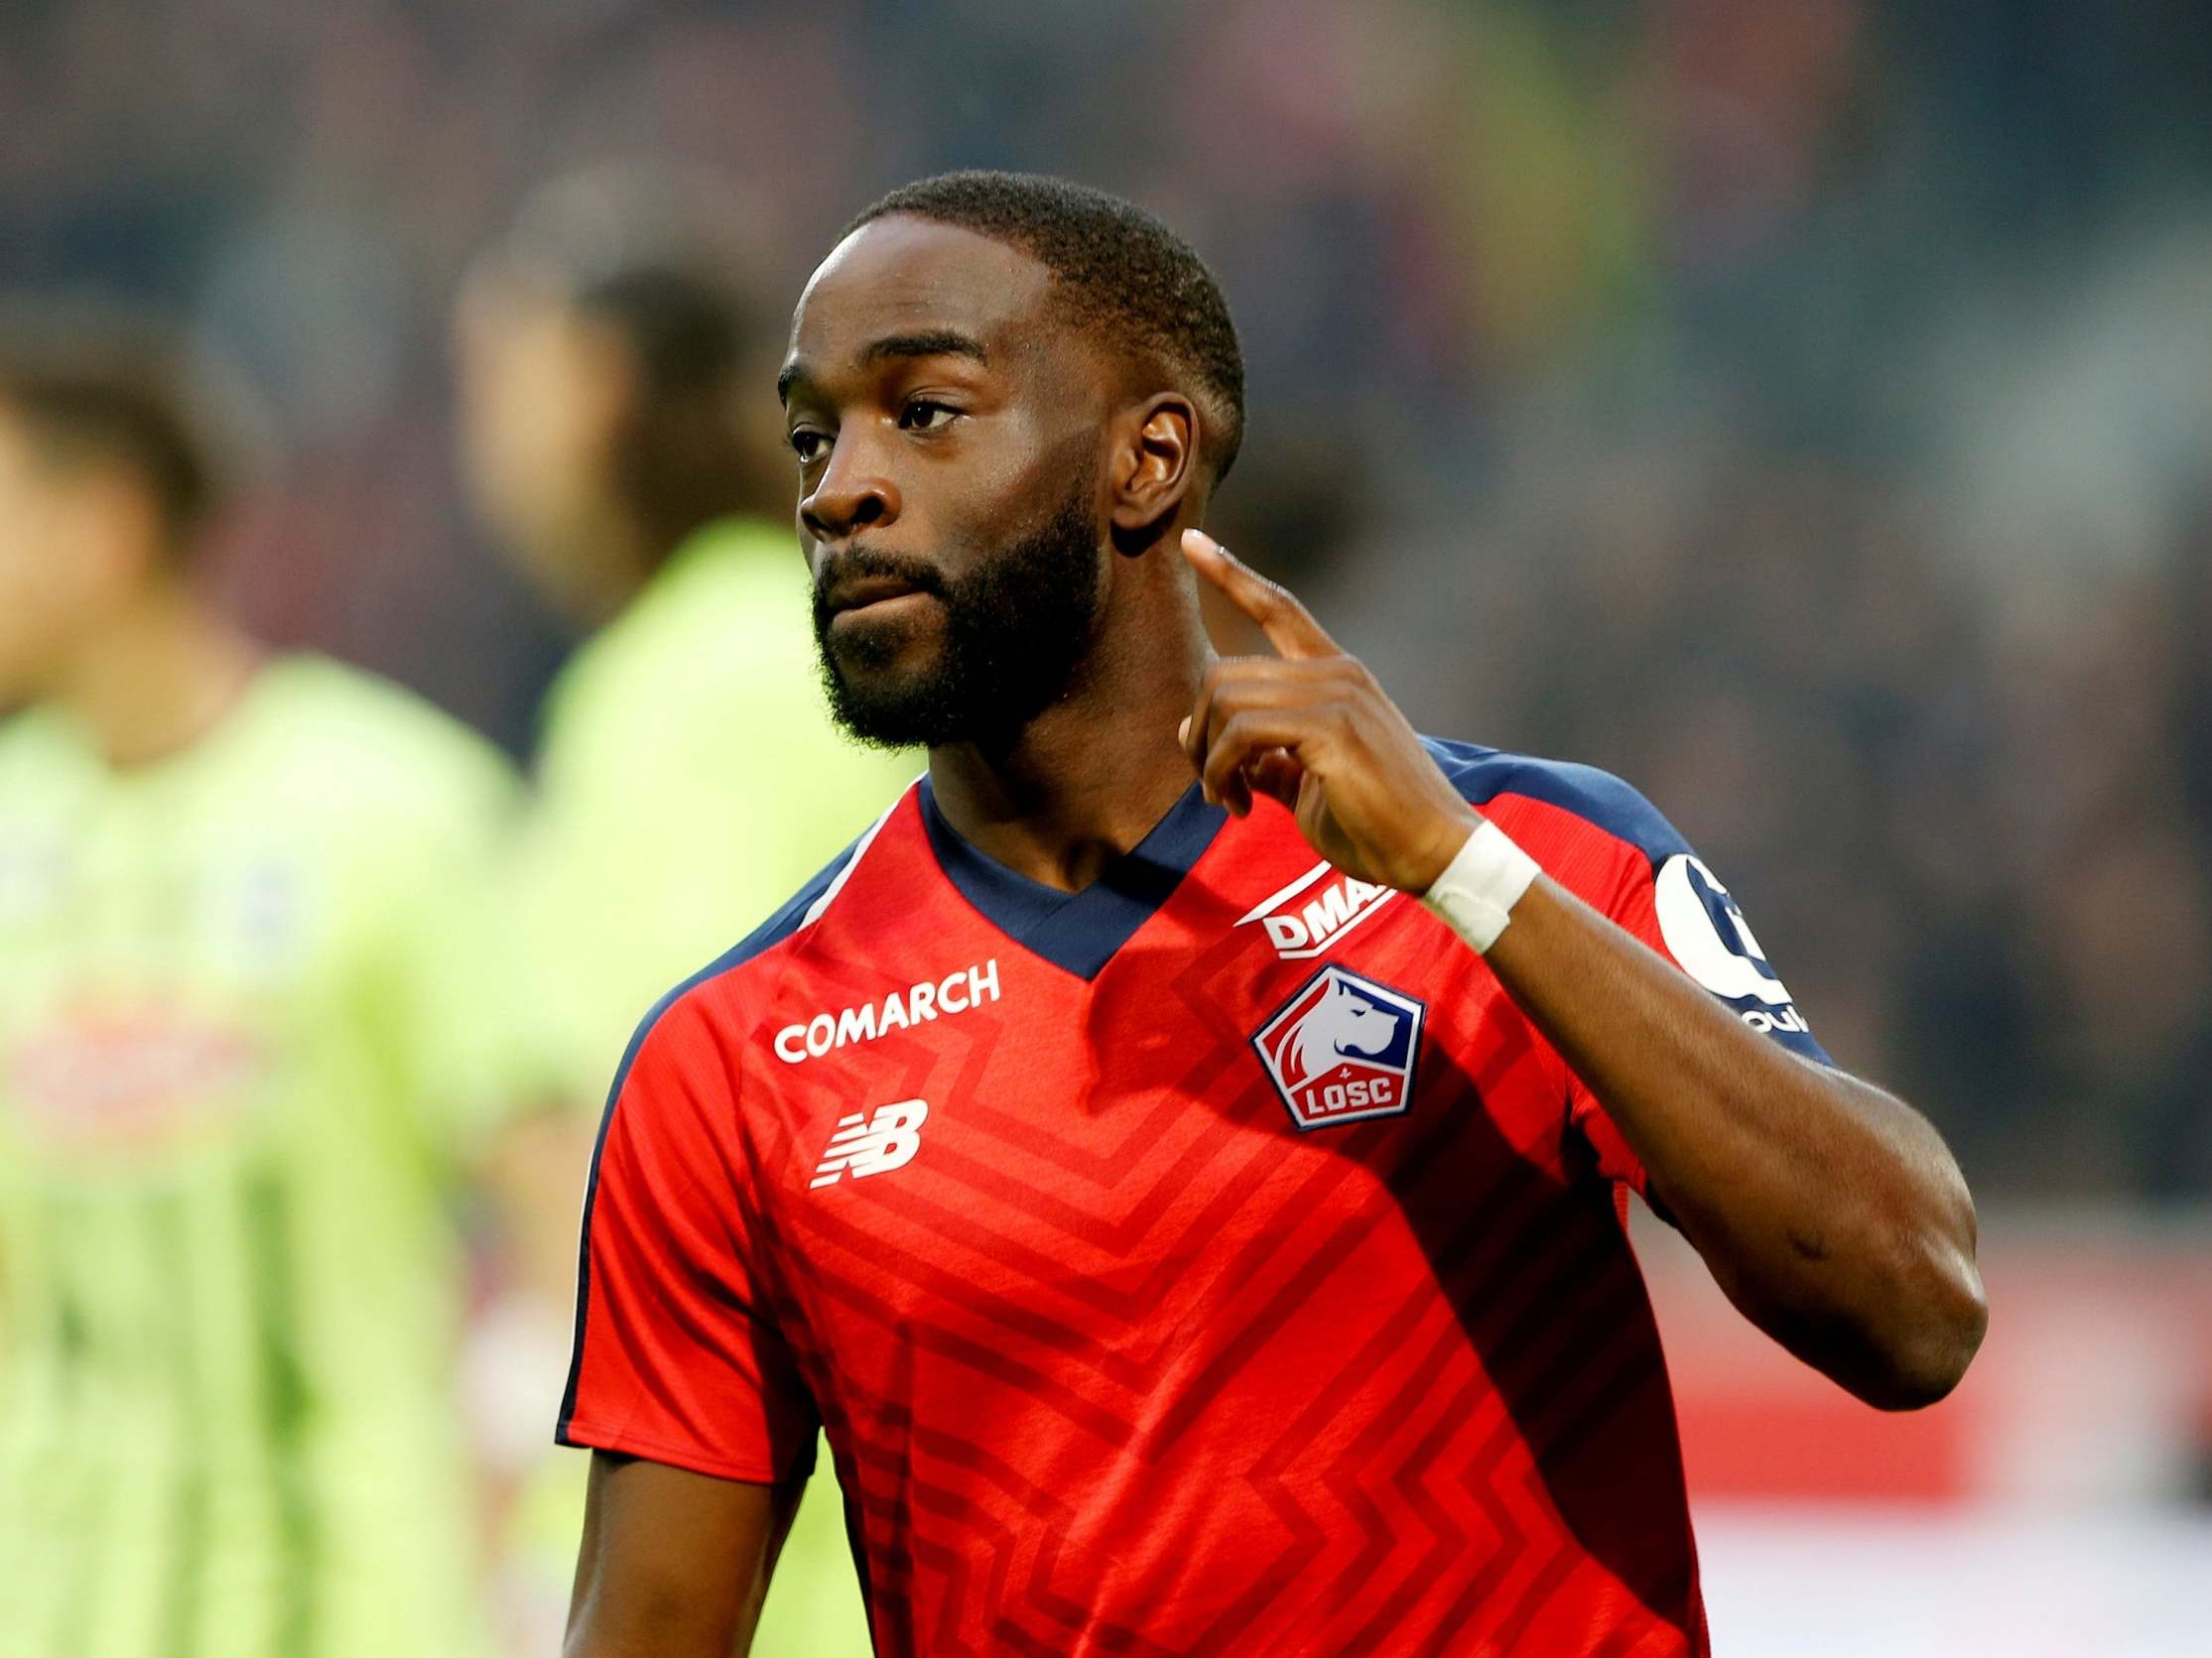 Ikone is emerging as a star for Lille